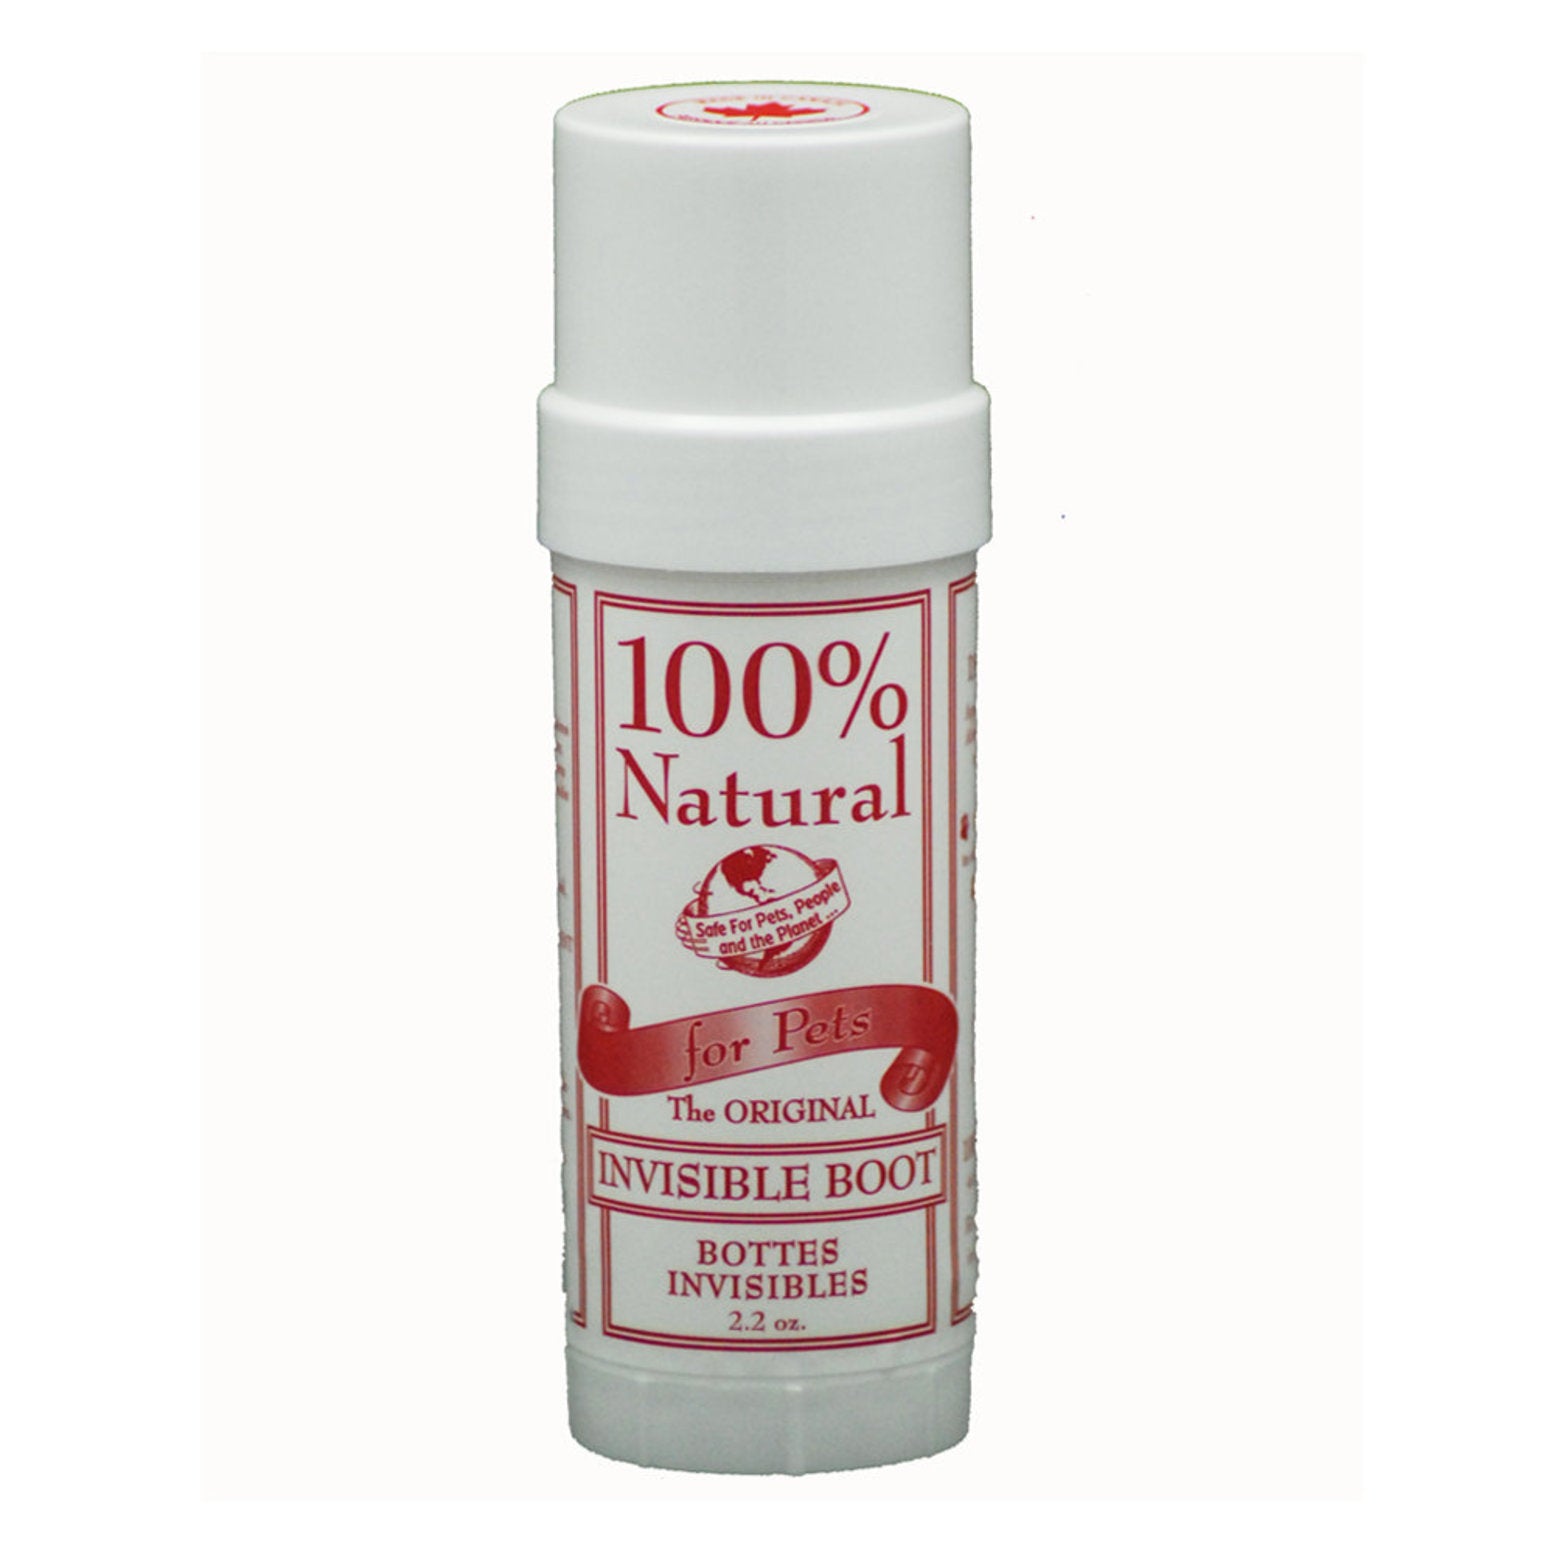 100% Natural Invisible Boot Paw - Stick (2.2oz)